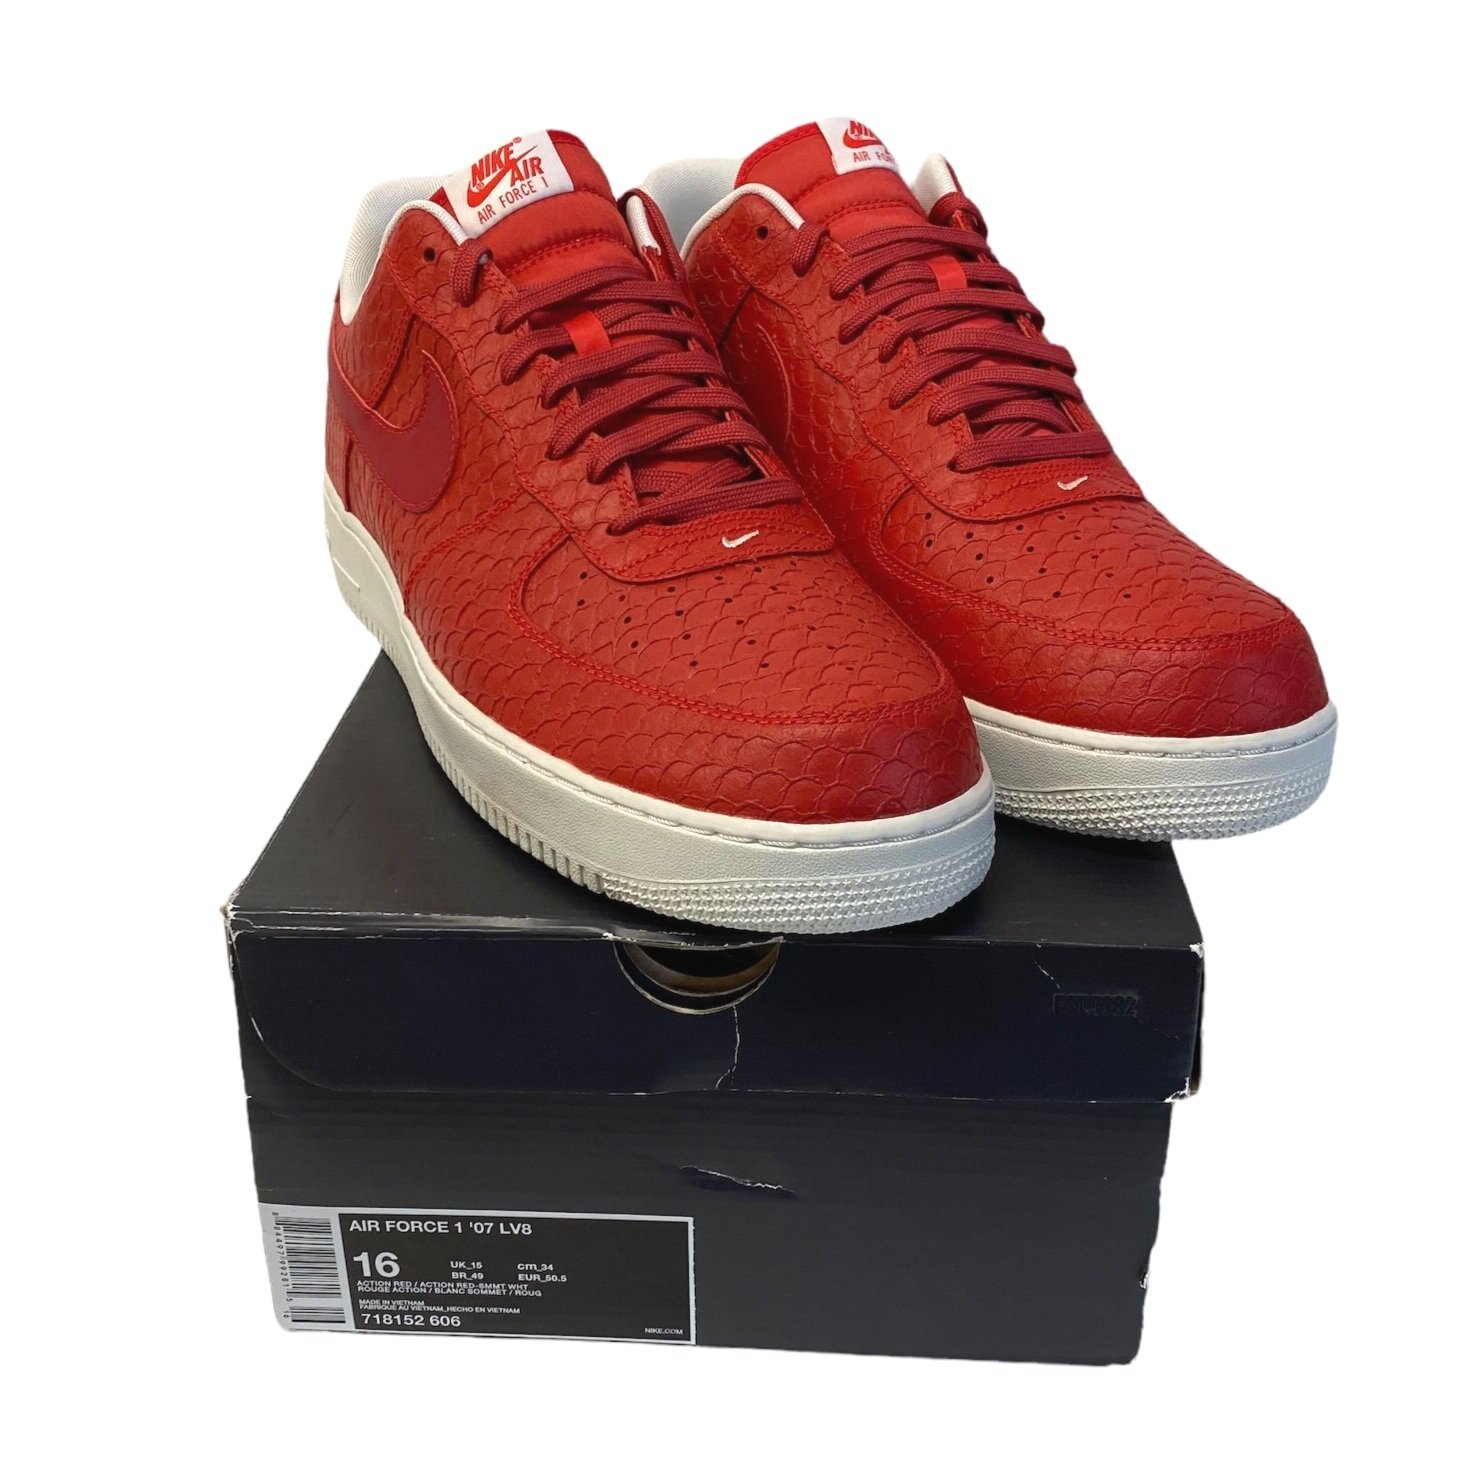 Nike Men's Air Force 1 High '07 LV8 Suede Basketball Shoes